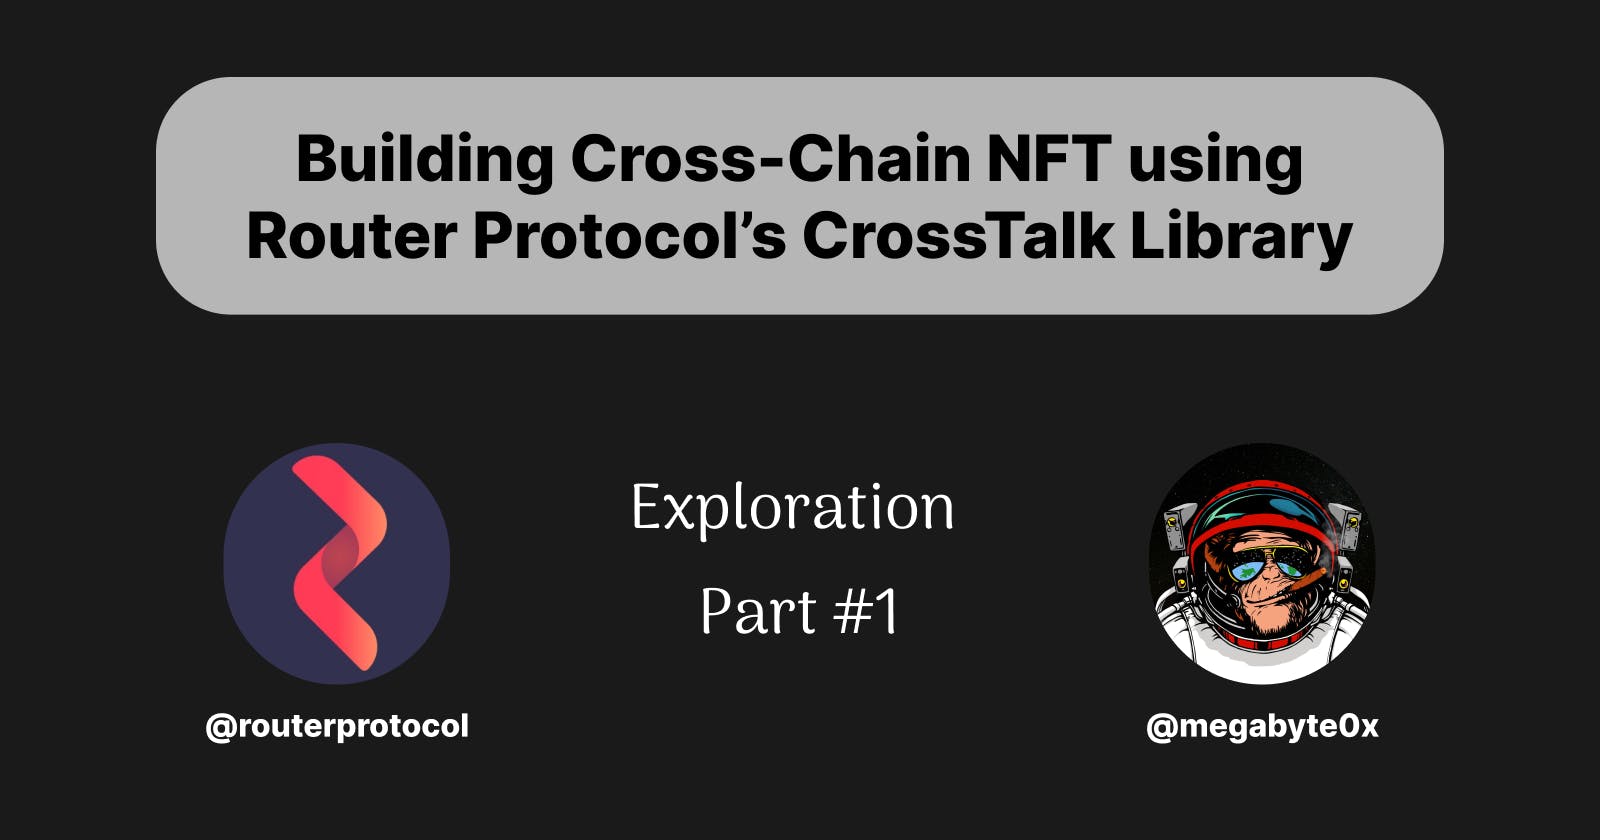 Building Cross-Chain NFT using Router Protocol's CrossTalk Library